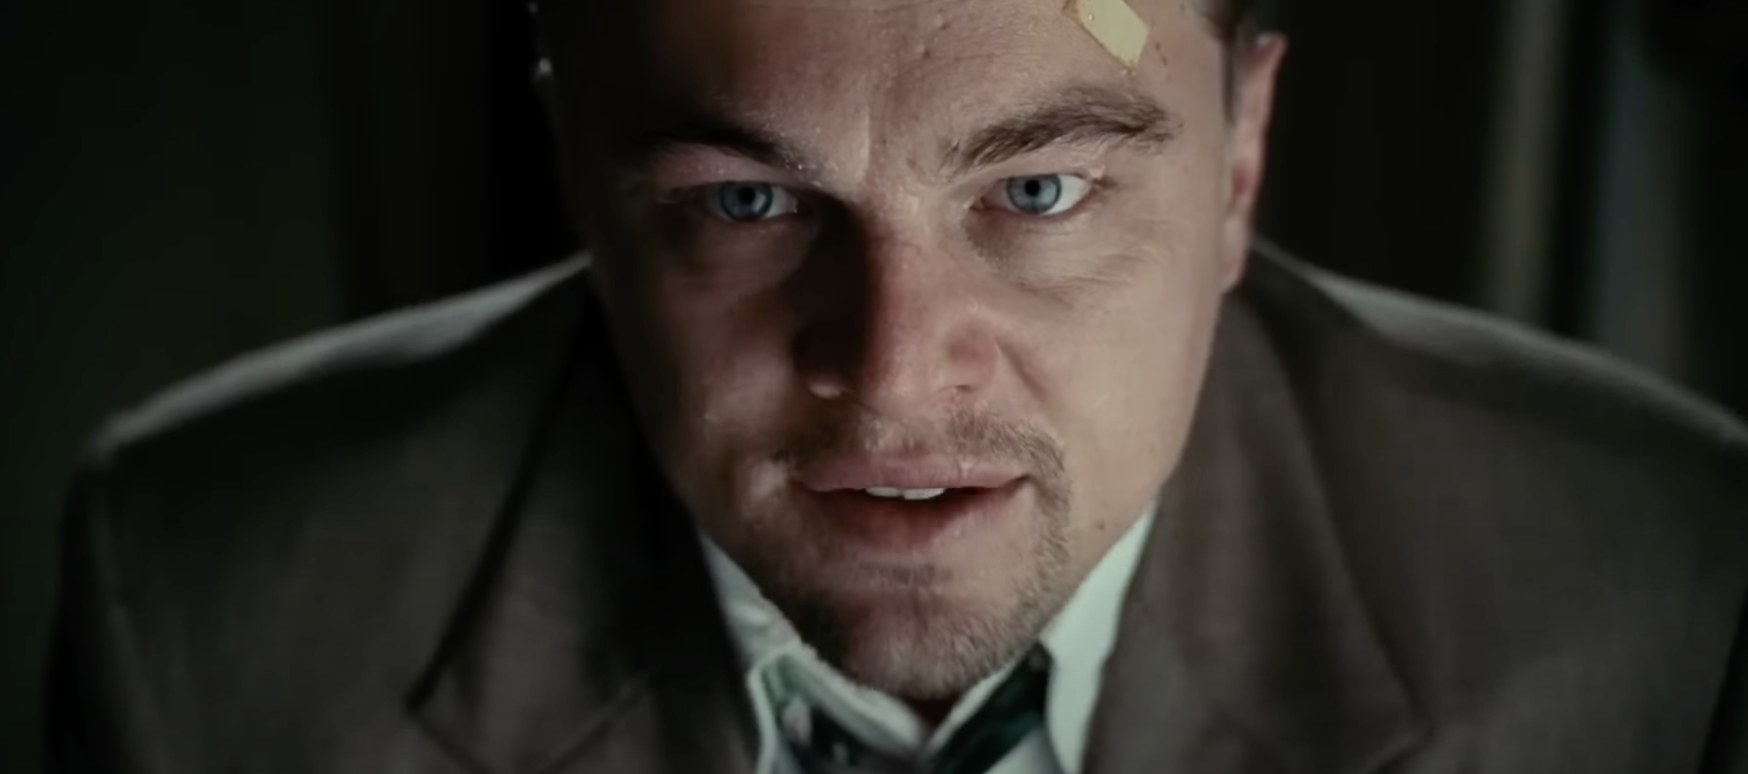 a close-up shot of Leonardo DiCaprio, who looks confused and has a bandage on his forehead